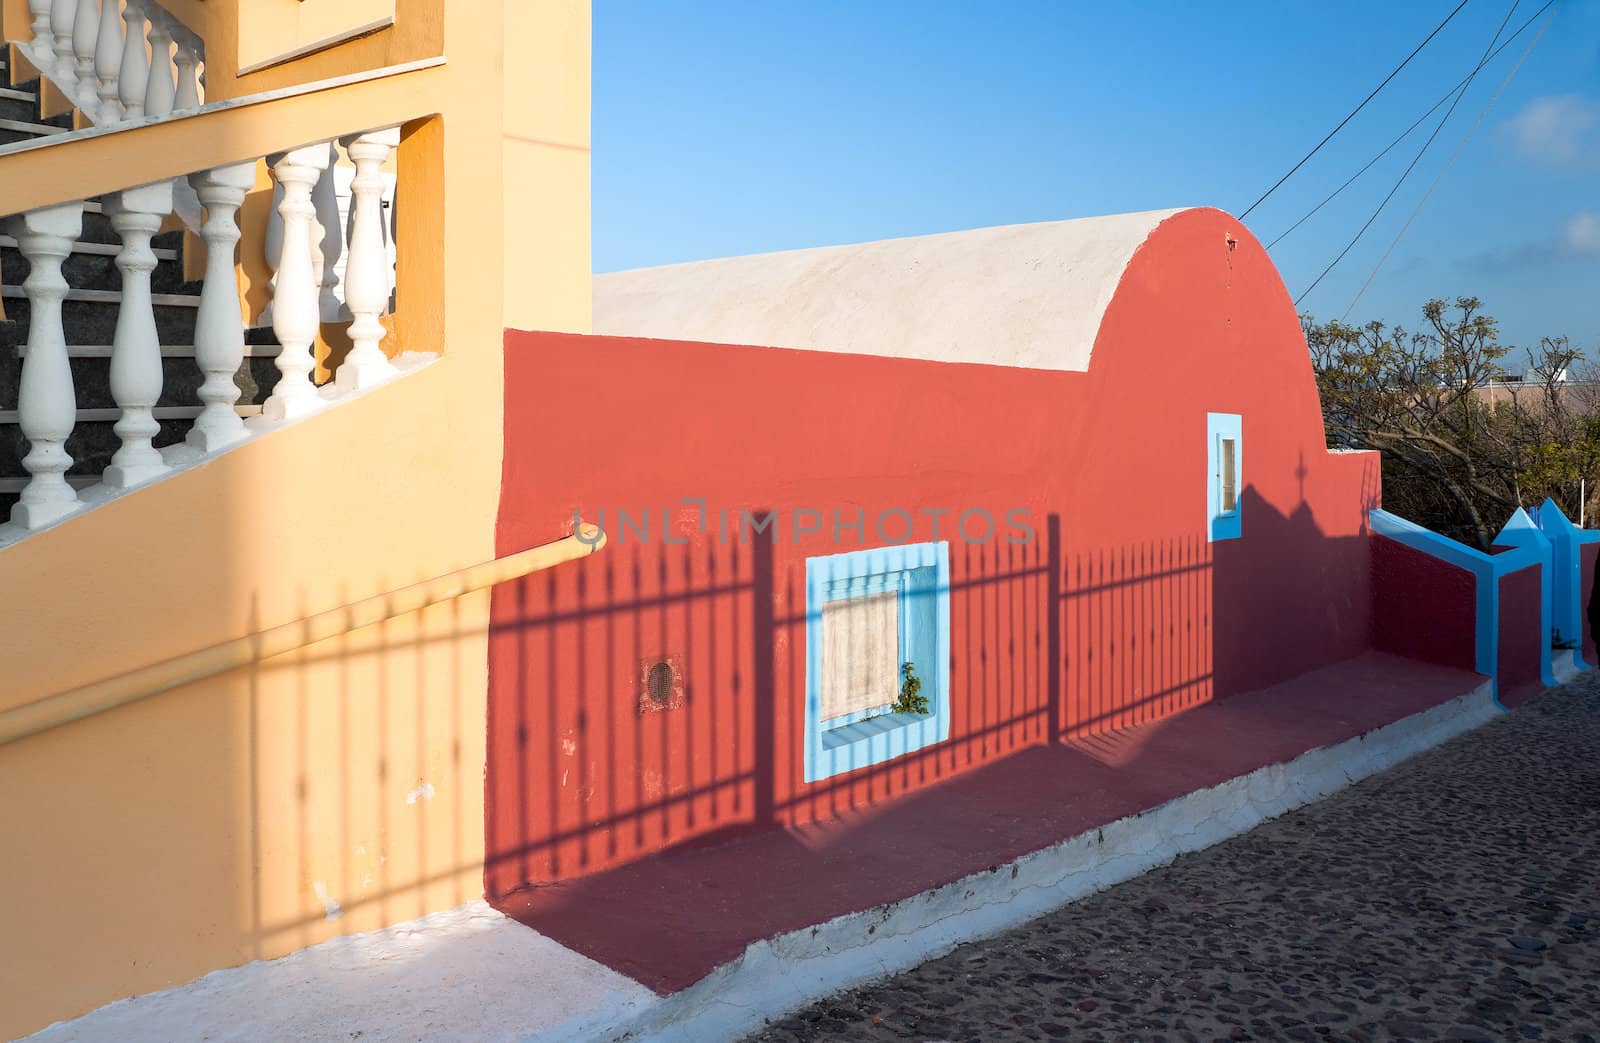 Yellow staircase and the red building in Santorini island